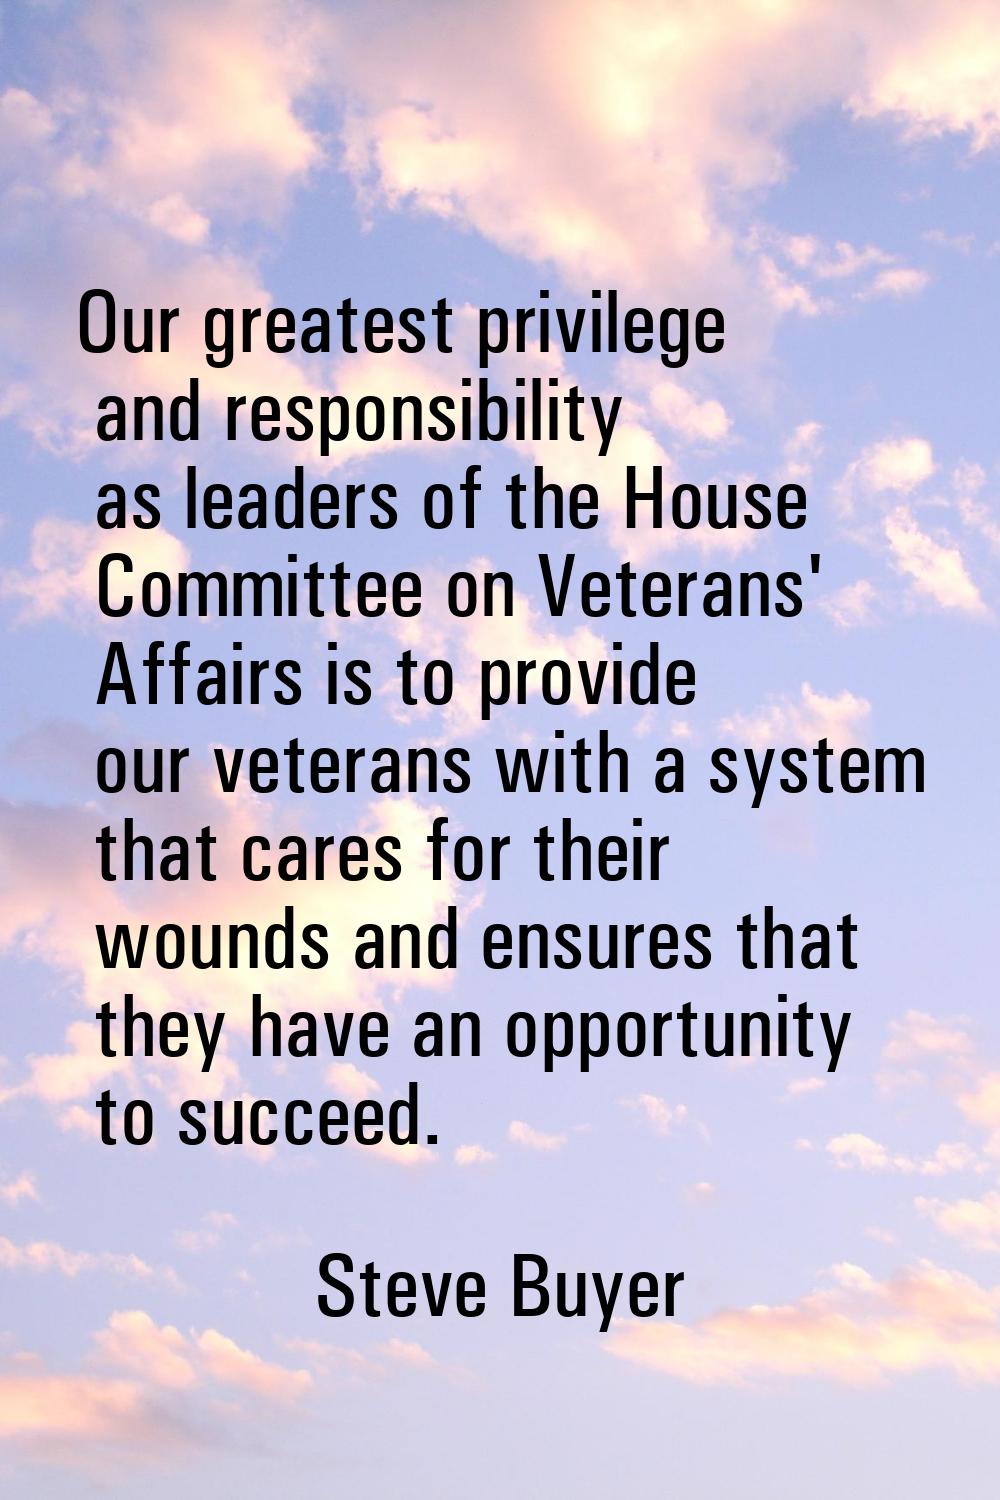 Our greatest privilege and responsibility as leaders of the House Committee on Veterans' Affairs is